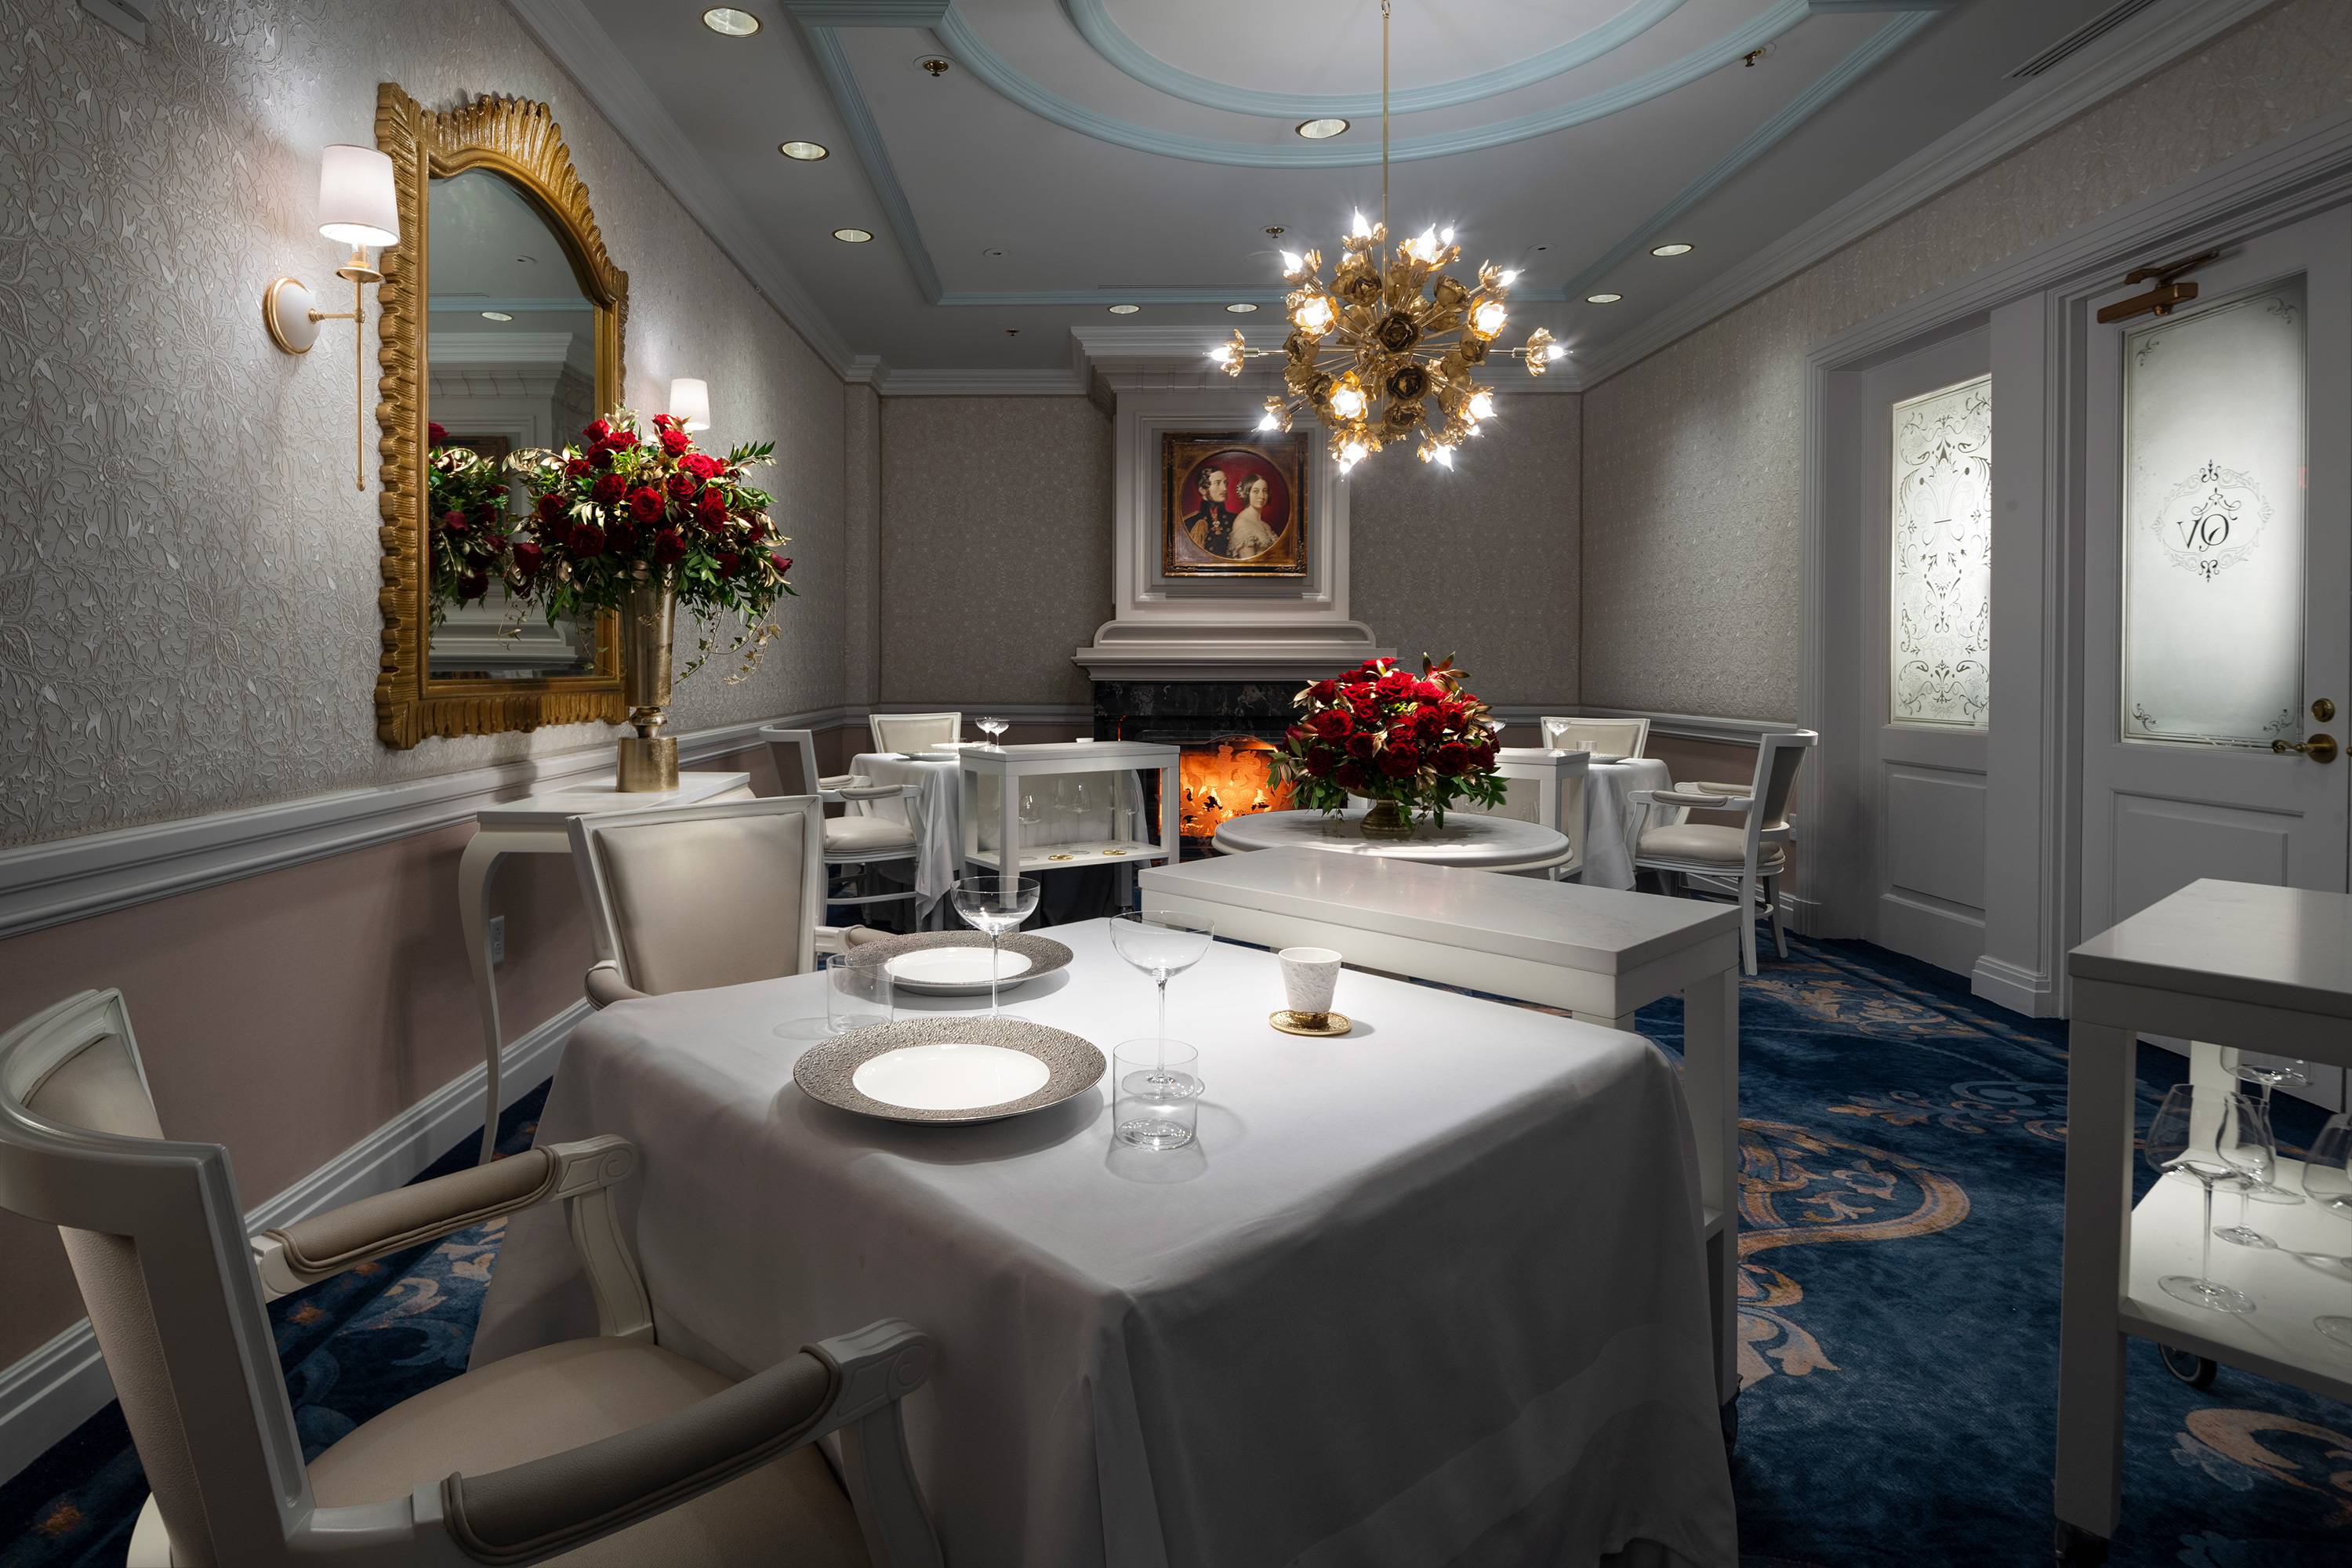 First look inside the new-look Victoria and Albert's dining room at Disney's Grand Floridian Resort